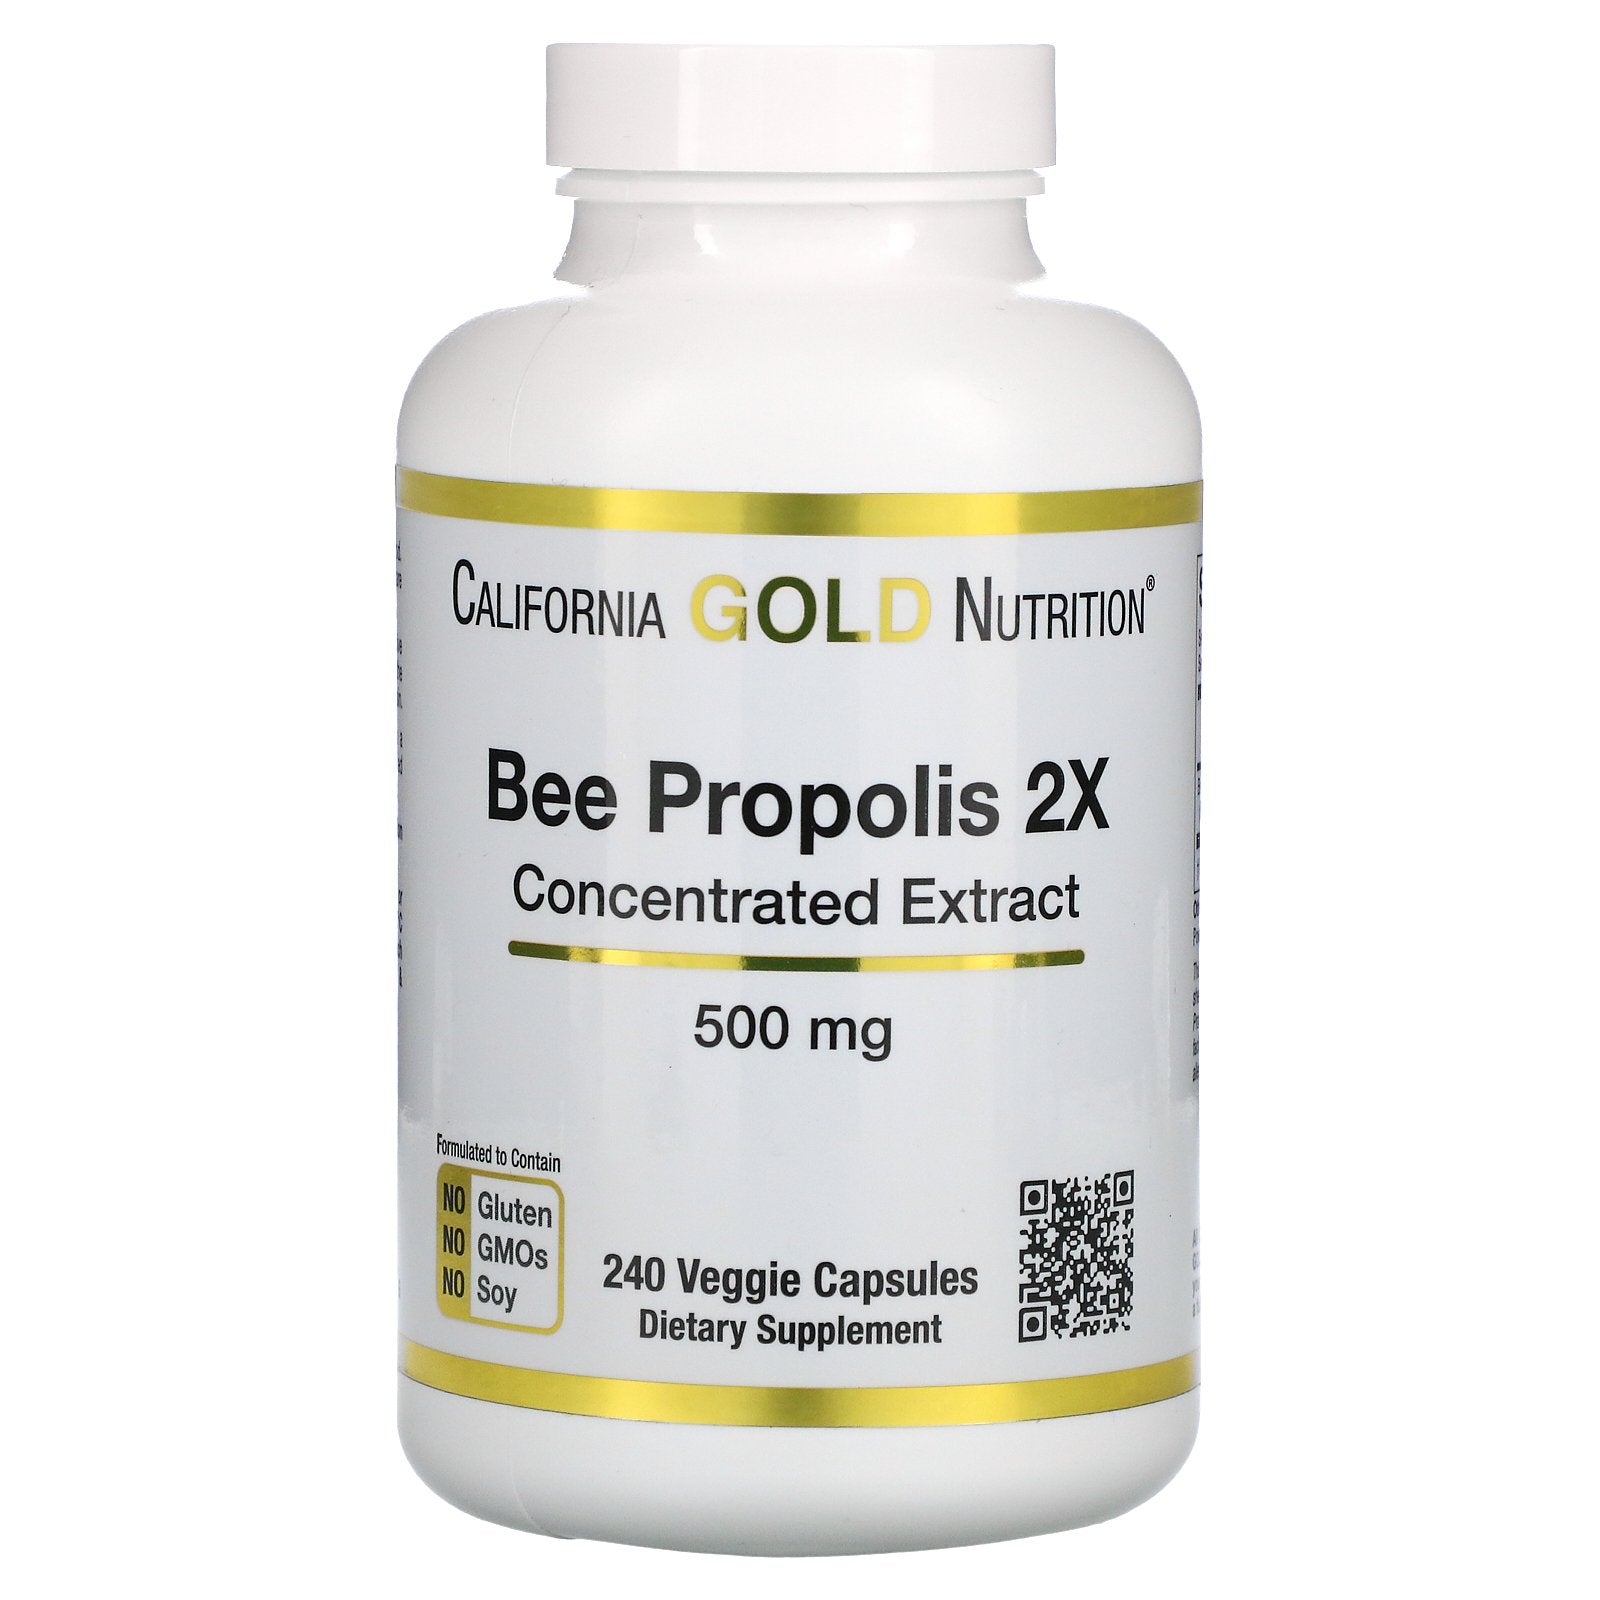 California Gold Nutrition, Bee Propolis 2X, Concentrated Extract, 500 mg